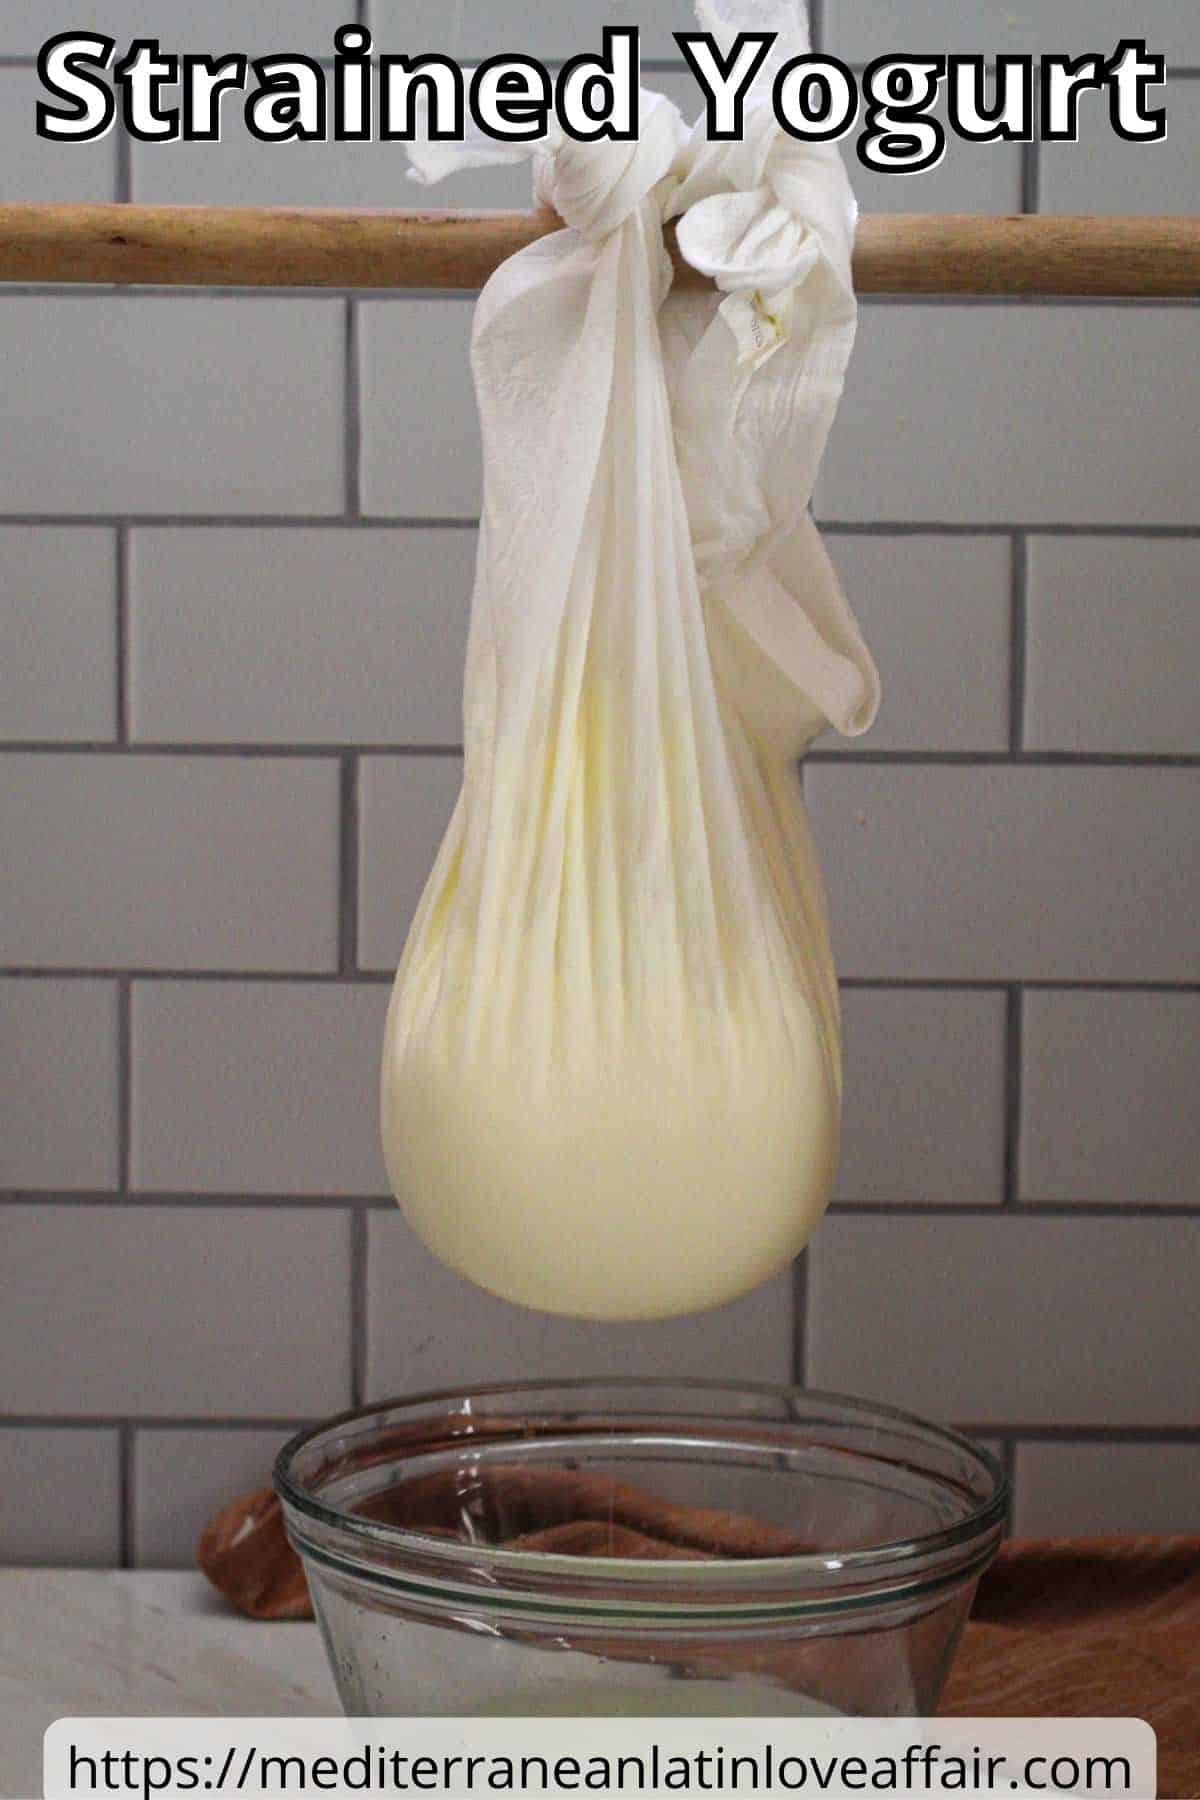 Yogurt on a muslin cloth hanging on a rod, over a glass container showing whey already. The picture is a depiction of straining yogurt. Image is prepared for Pinterest, it shows the picture of straining yogurt but also has a title bar and a website link at the bottom.